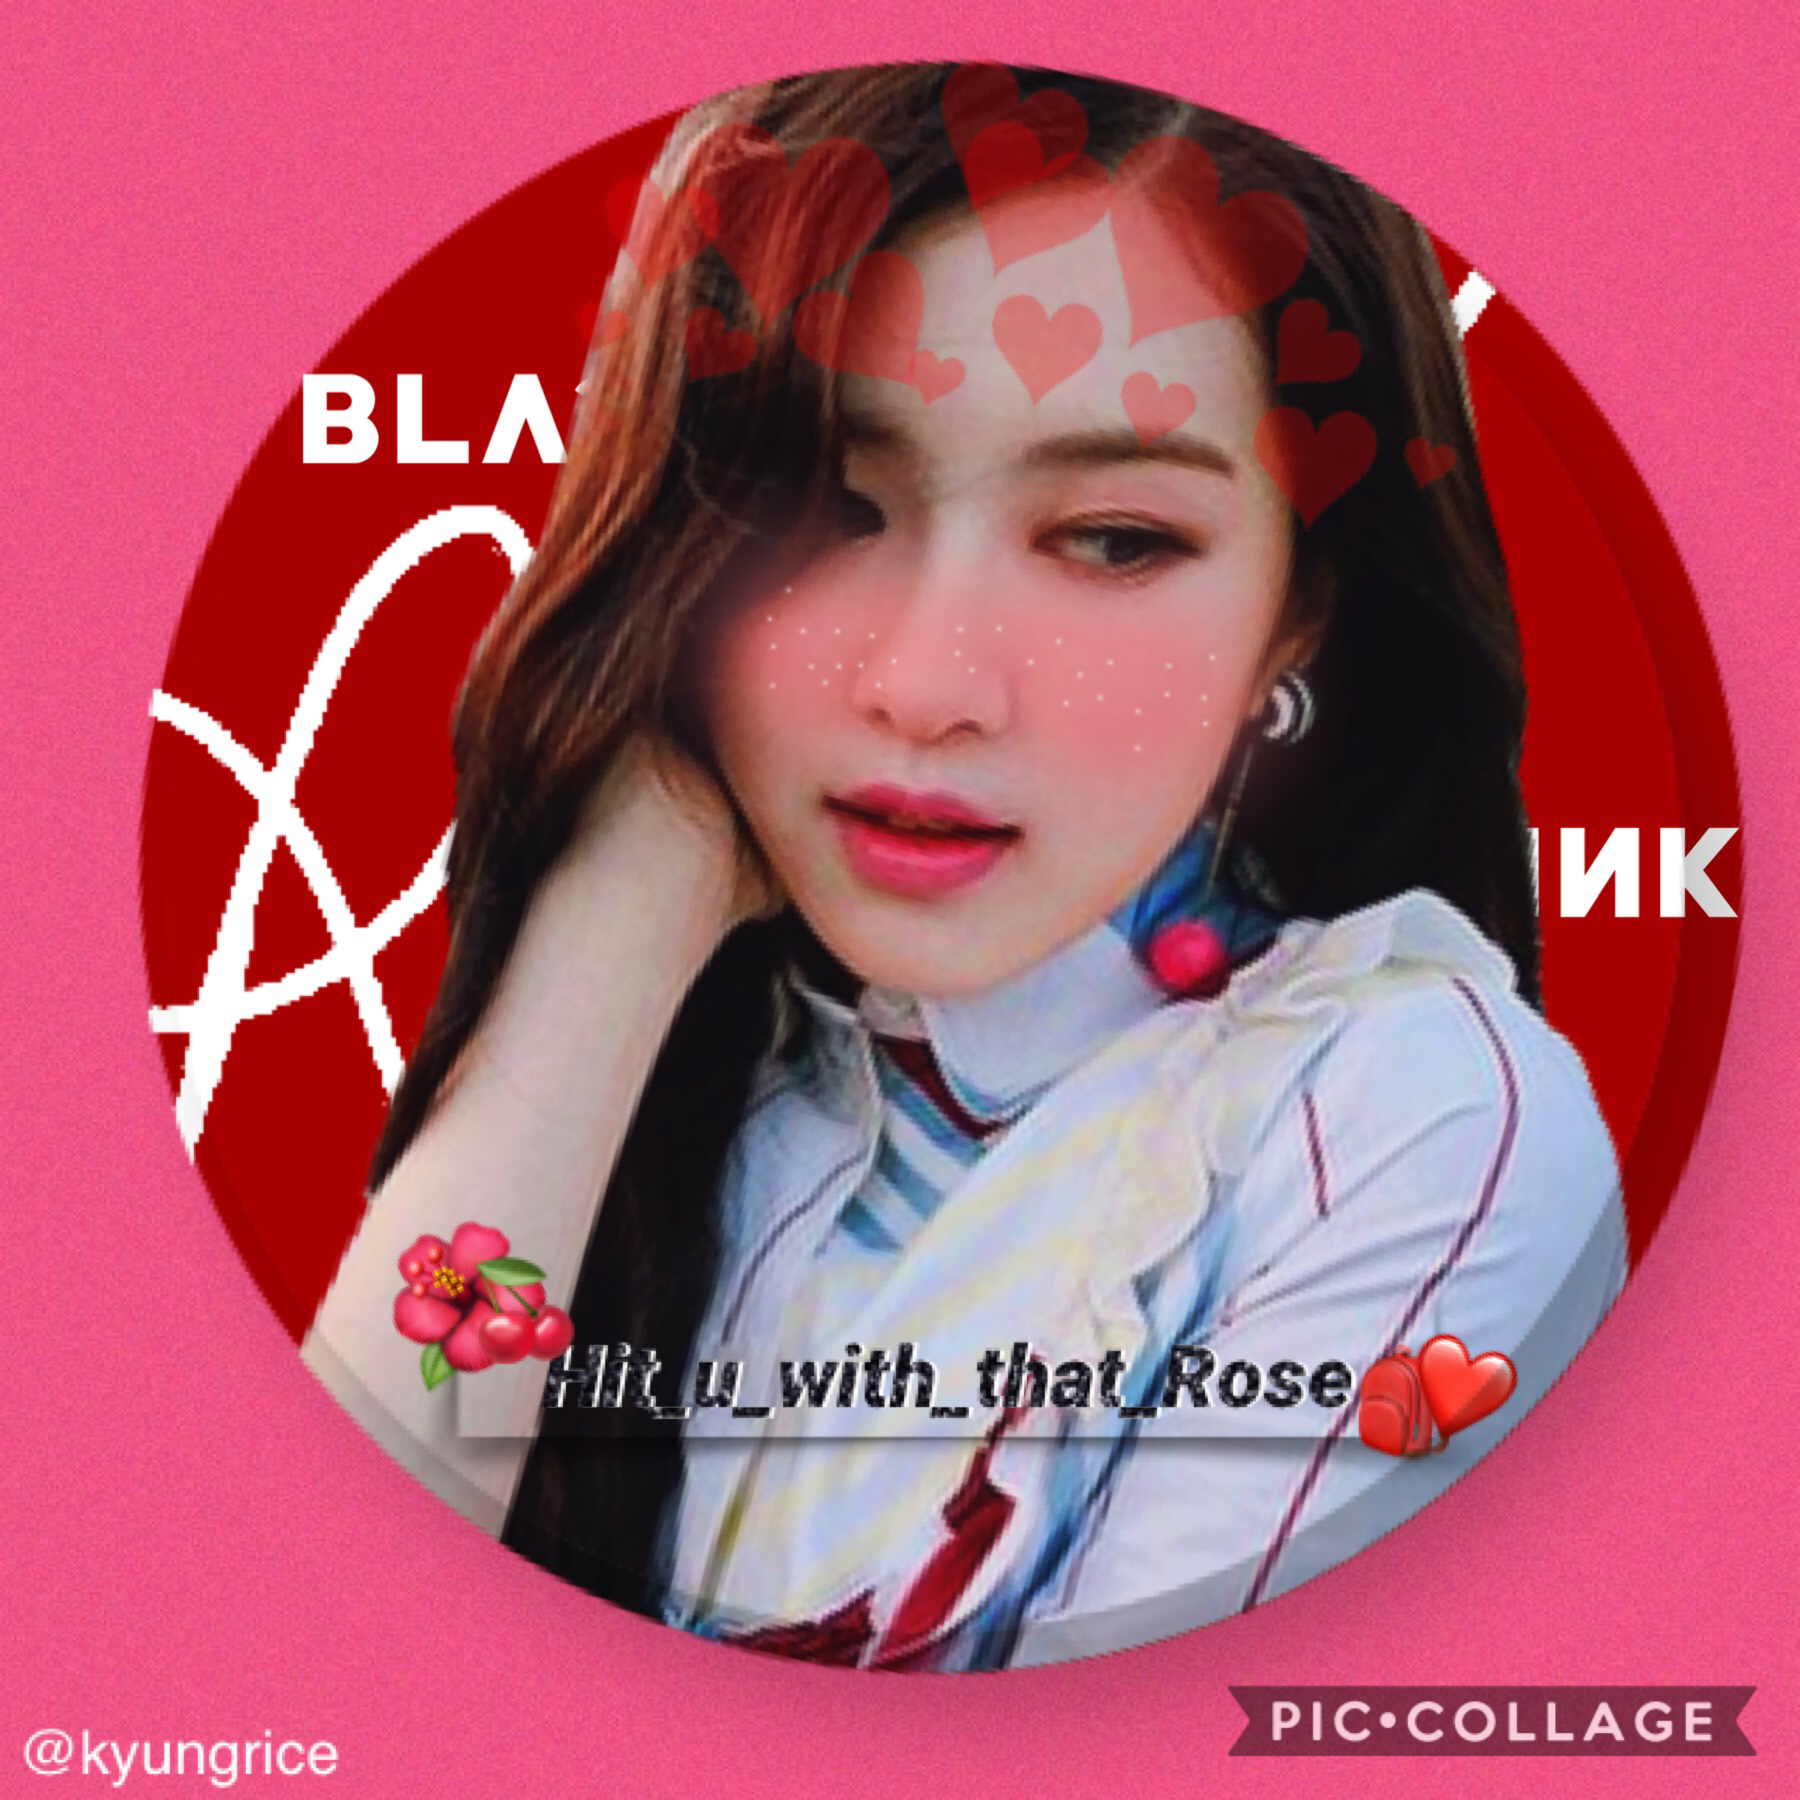 🌹RoSé🌹↓
icon for @Hit_u_with_that_Rose
i hope you like it!❤️